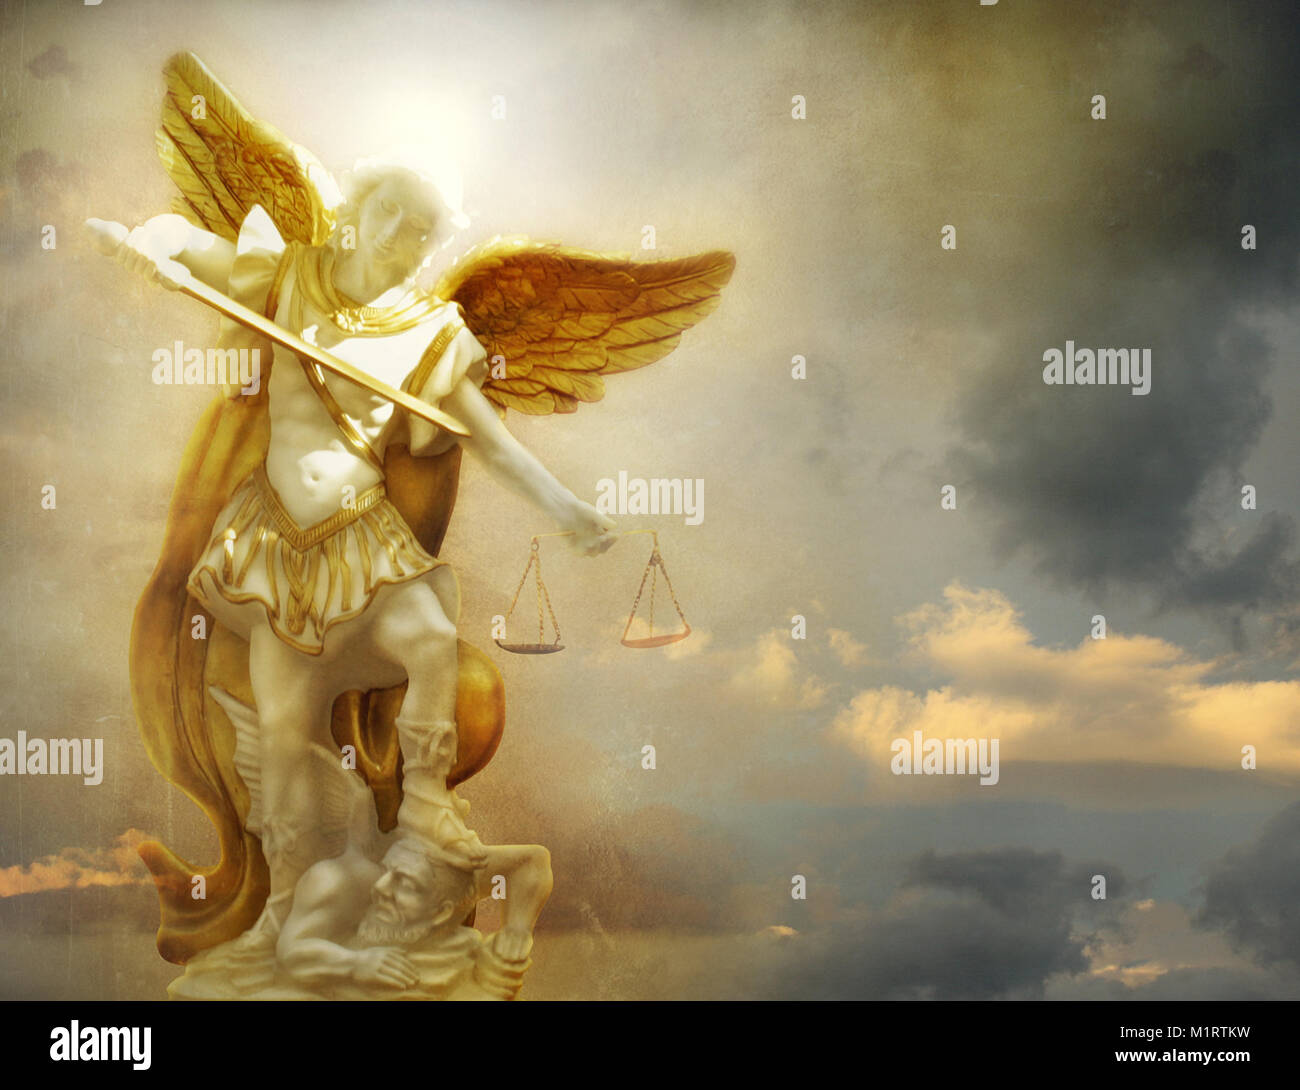 Wonderful image of a statue of St. Michael the Archangel Stock Photo